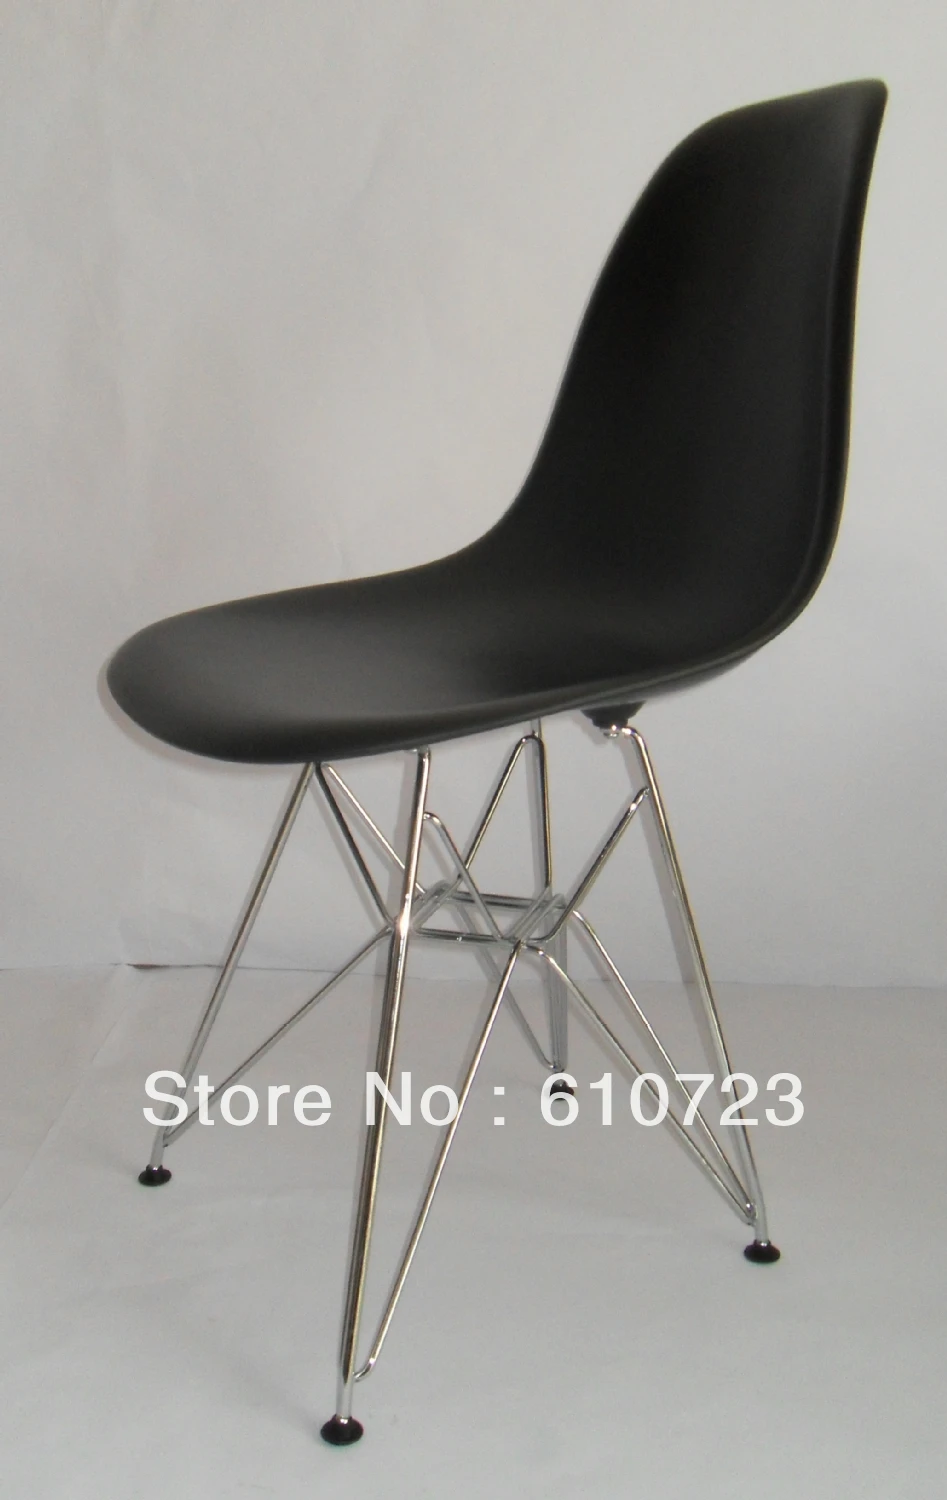 

whole sales,The fashion of modern plastic chair/ metal legs,can disassembling